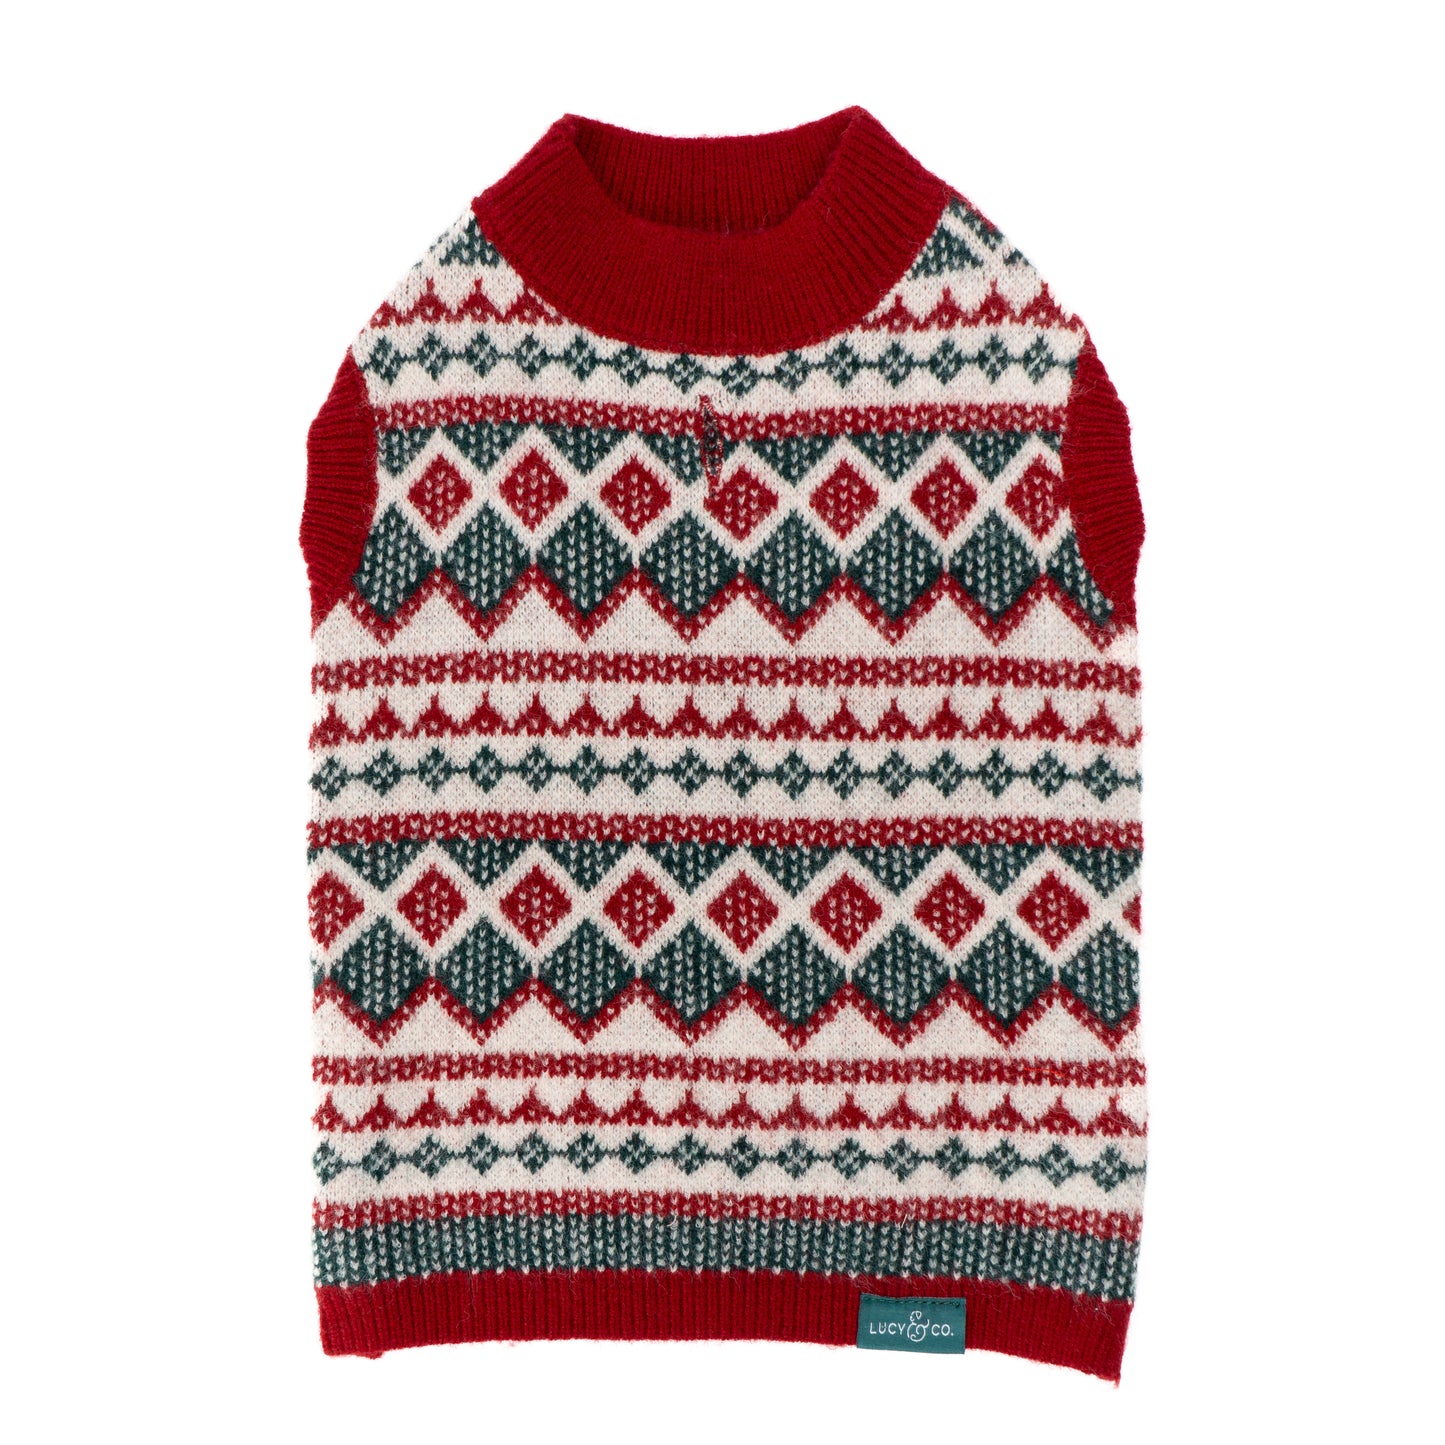 Limited Edition! The Holiday Cheer Sweater